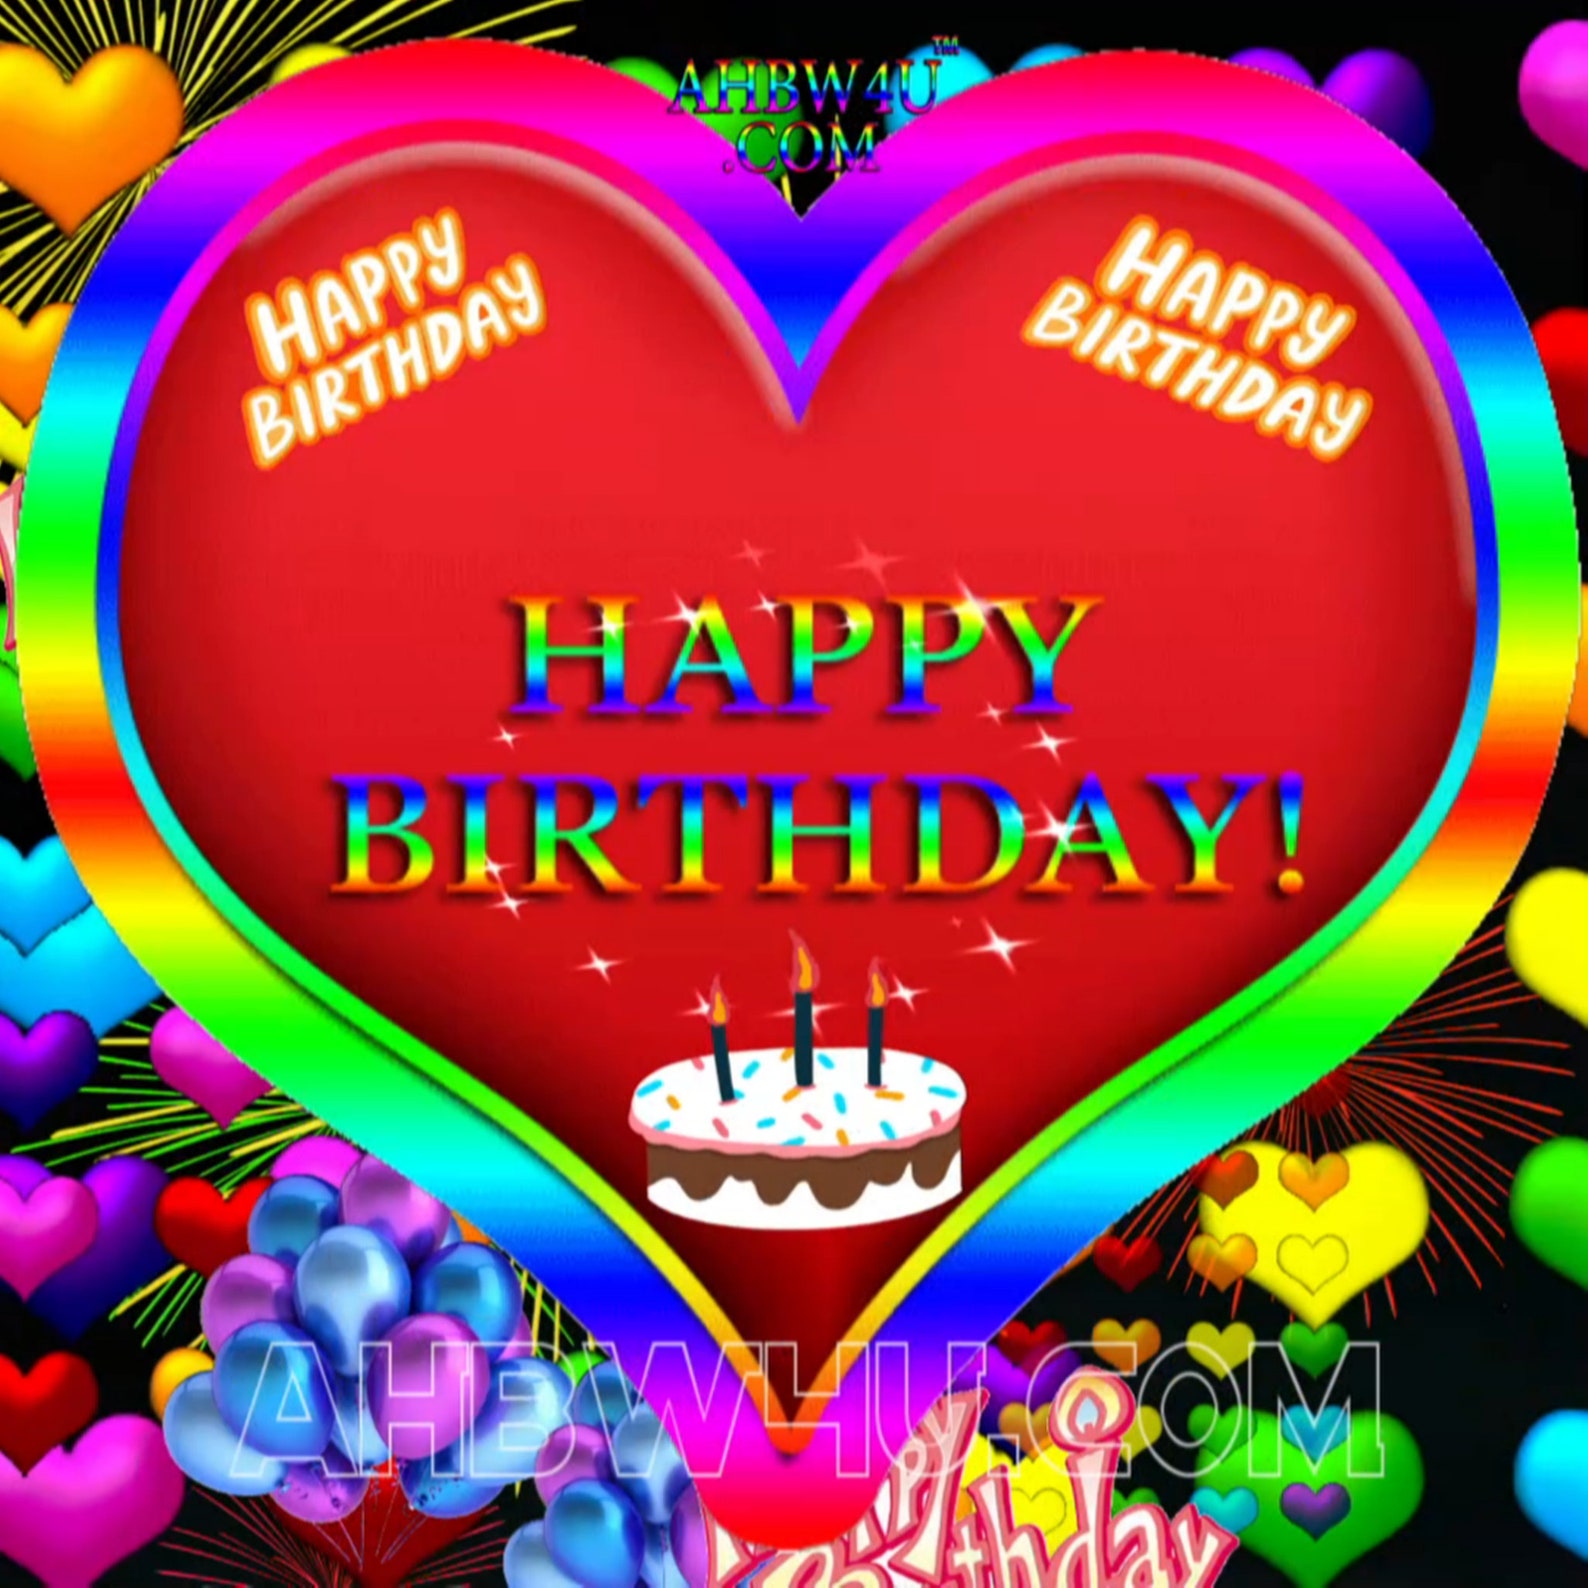 Animated Happy Birthday Wishes Gifs 137 & 176 Buy 1 and Get - Etsy